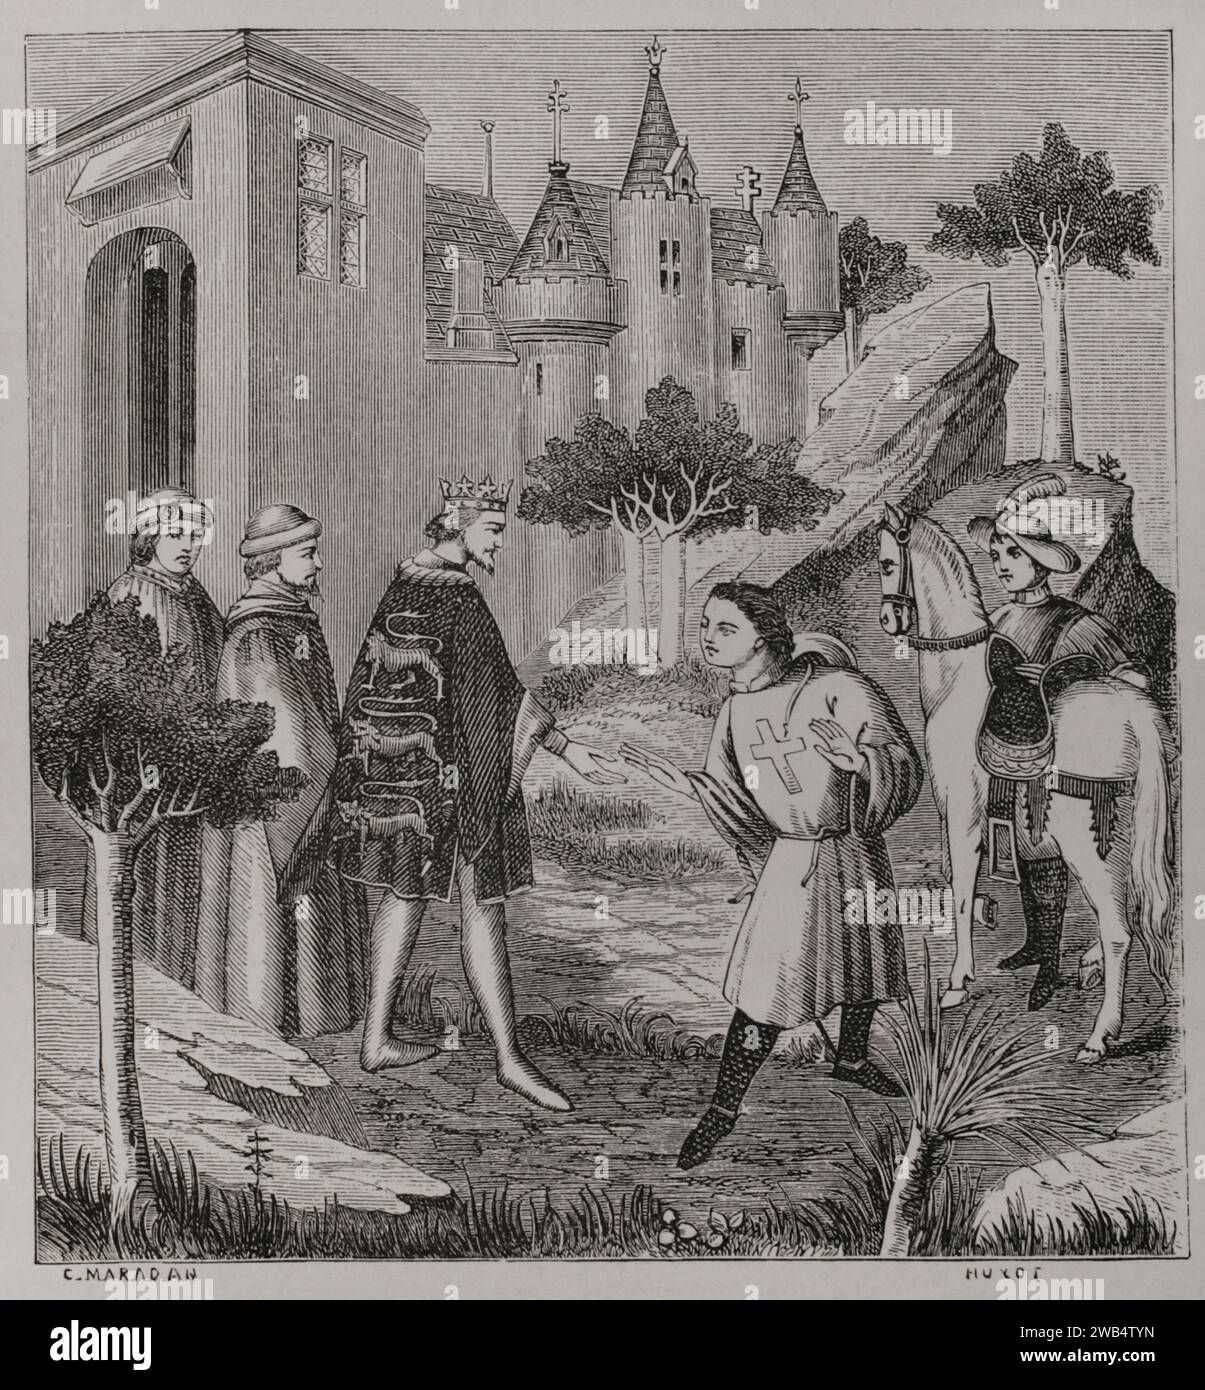 John de Mandeville, celebrated fictional character from the book 'The Travels of Sir John Mandeville' (Mandeville's Travels), written between 1357 and 1371. It is about an English gentleman who travelled the world for thirty-four years, narrating everything that happened. John de Mandeville taking leave of King Edward III (1312-1377) before his departure for 'beyond the Seas'. Drawing by C. Maradan. Engraving by Huyot. After a 15th-century miniature. Sciences & Lettres au Moyen Age et à l'époque de la Renaissance. Paris, 1877. Stock Photo